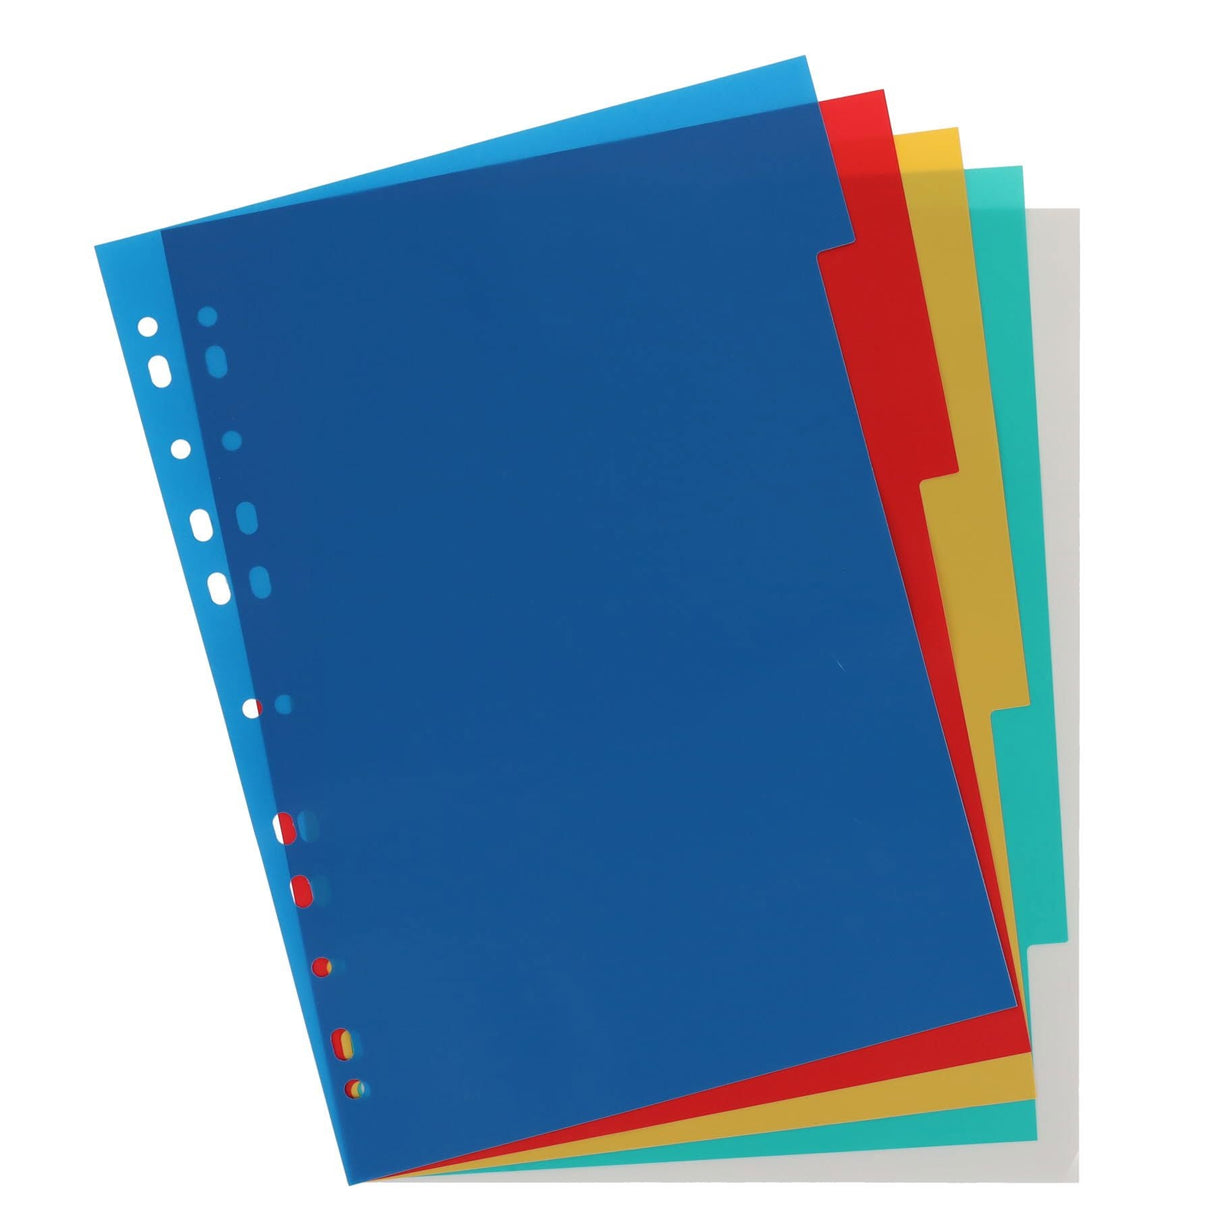 Concept Extra Strong Plastic Subject Dividers - 5 Dividers | Stationery Shop UK